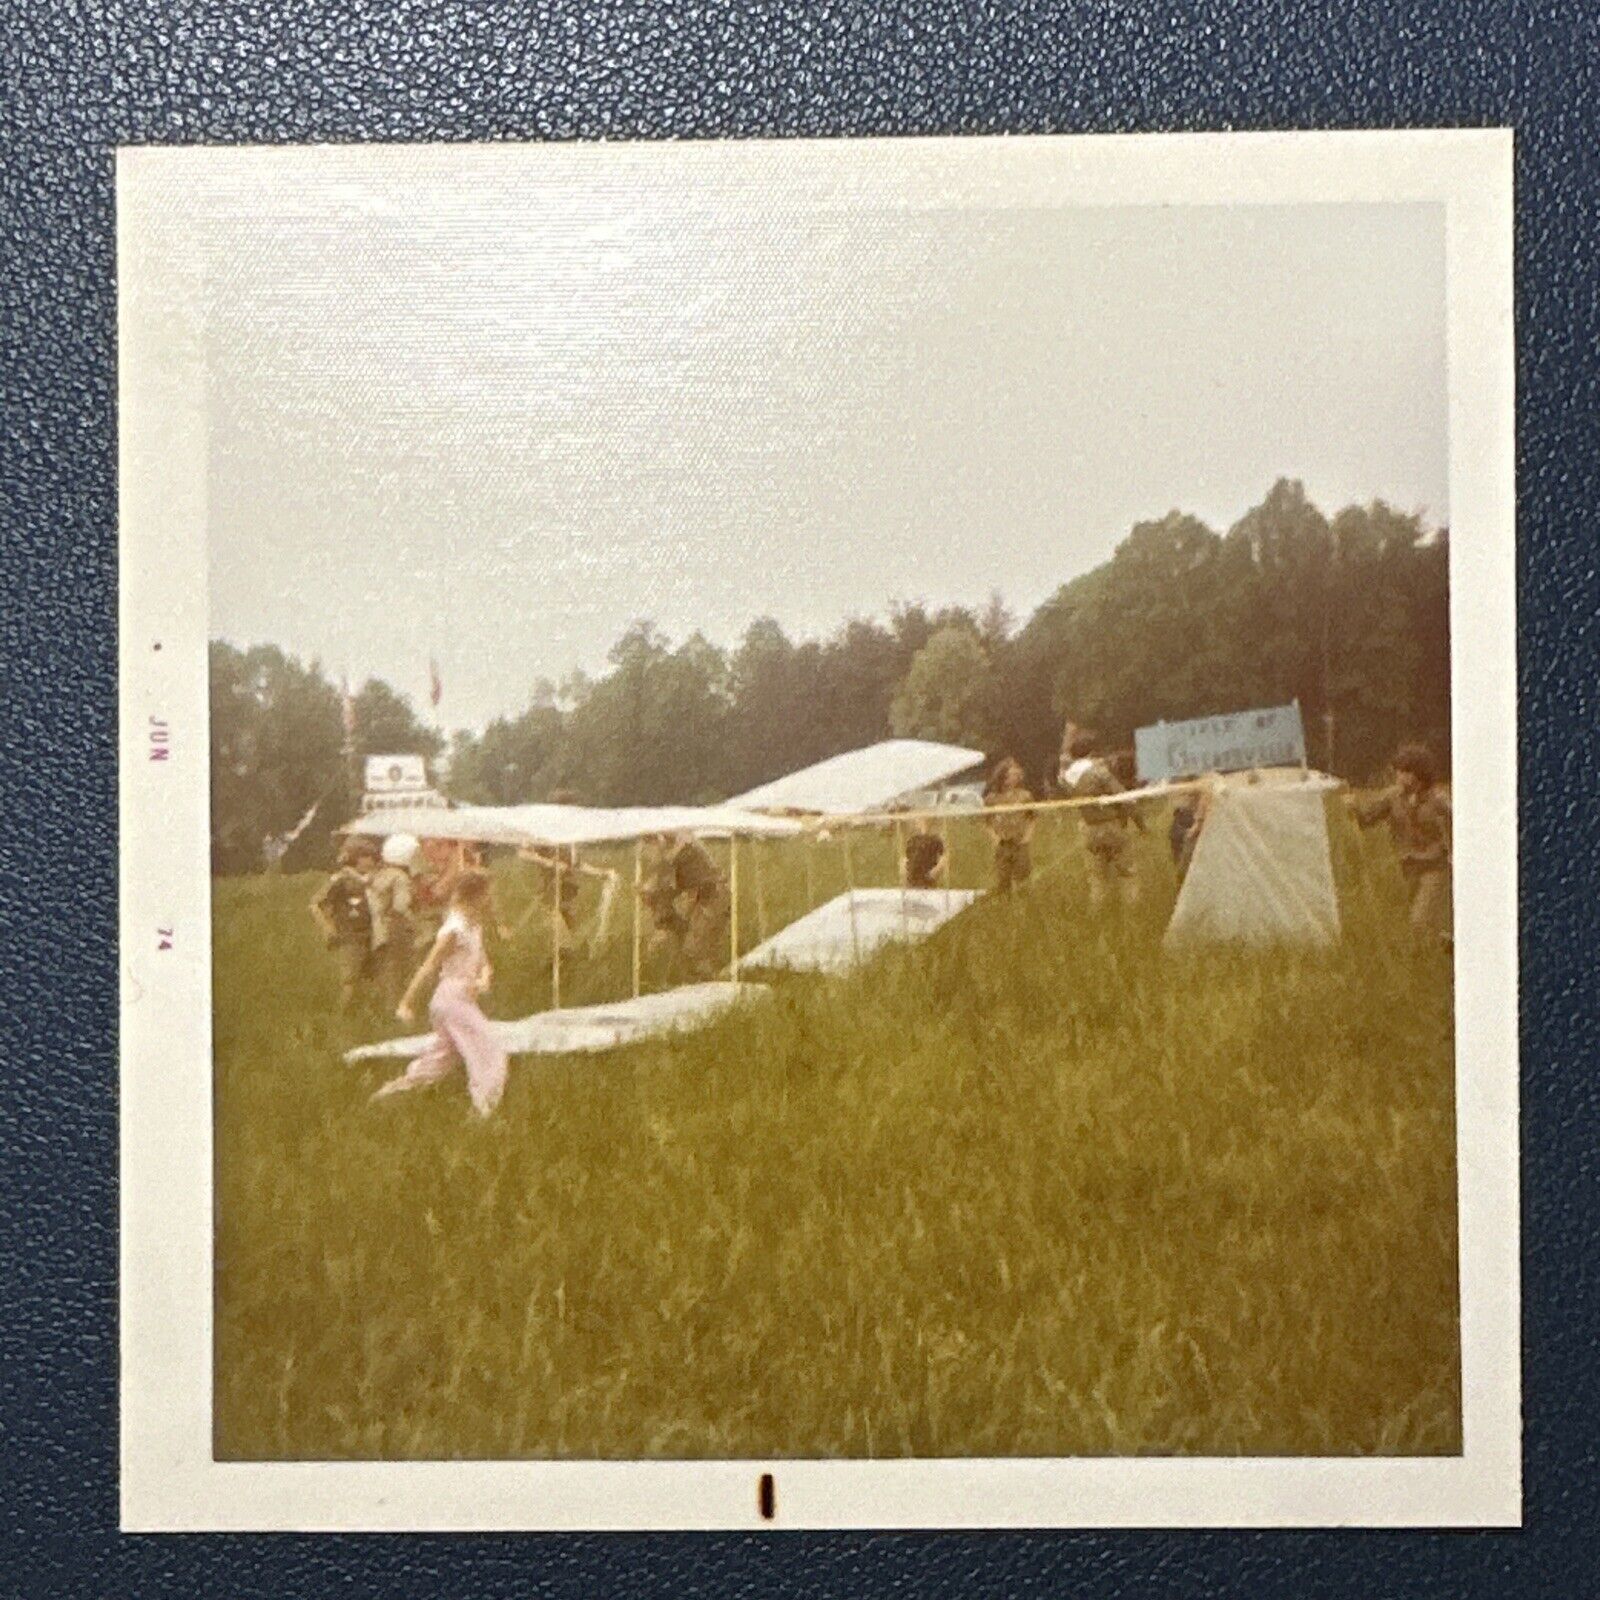 Gainesville, Texas - glider airplane wooden aircraft, VINTAGE PHOTO 1970s COLOR